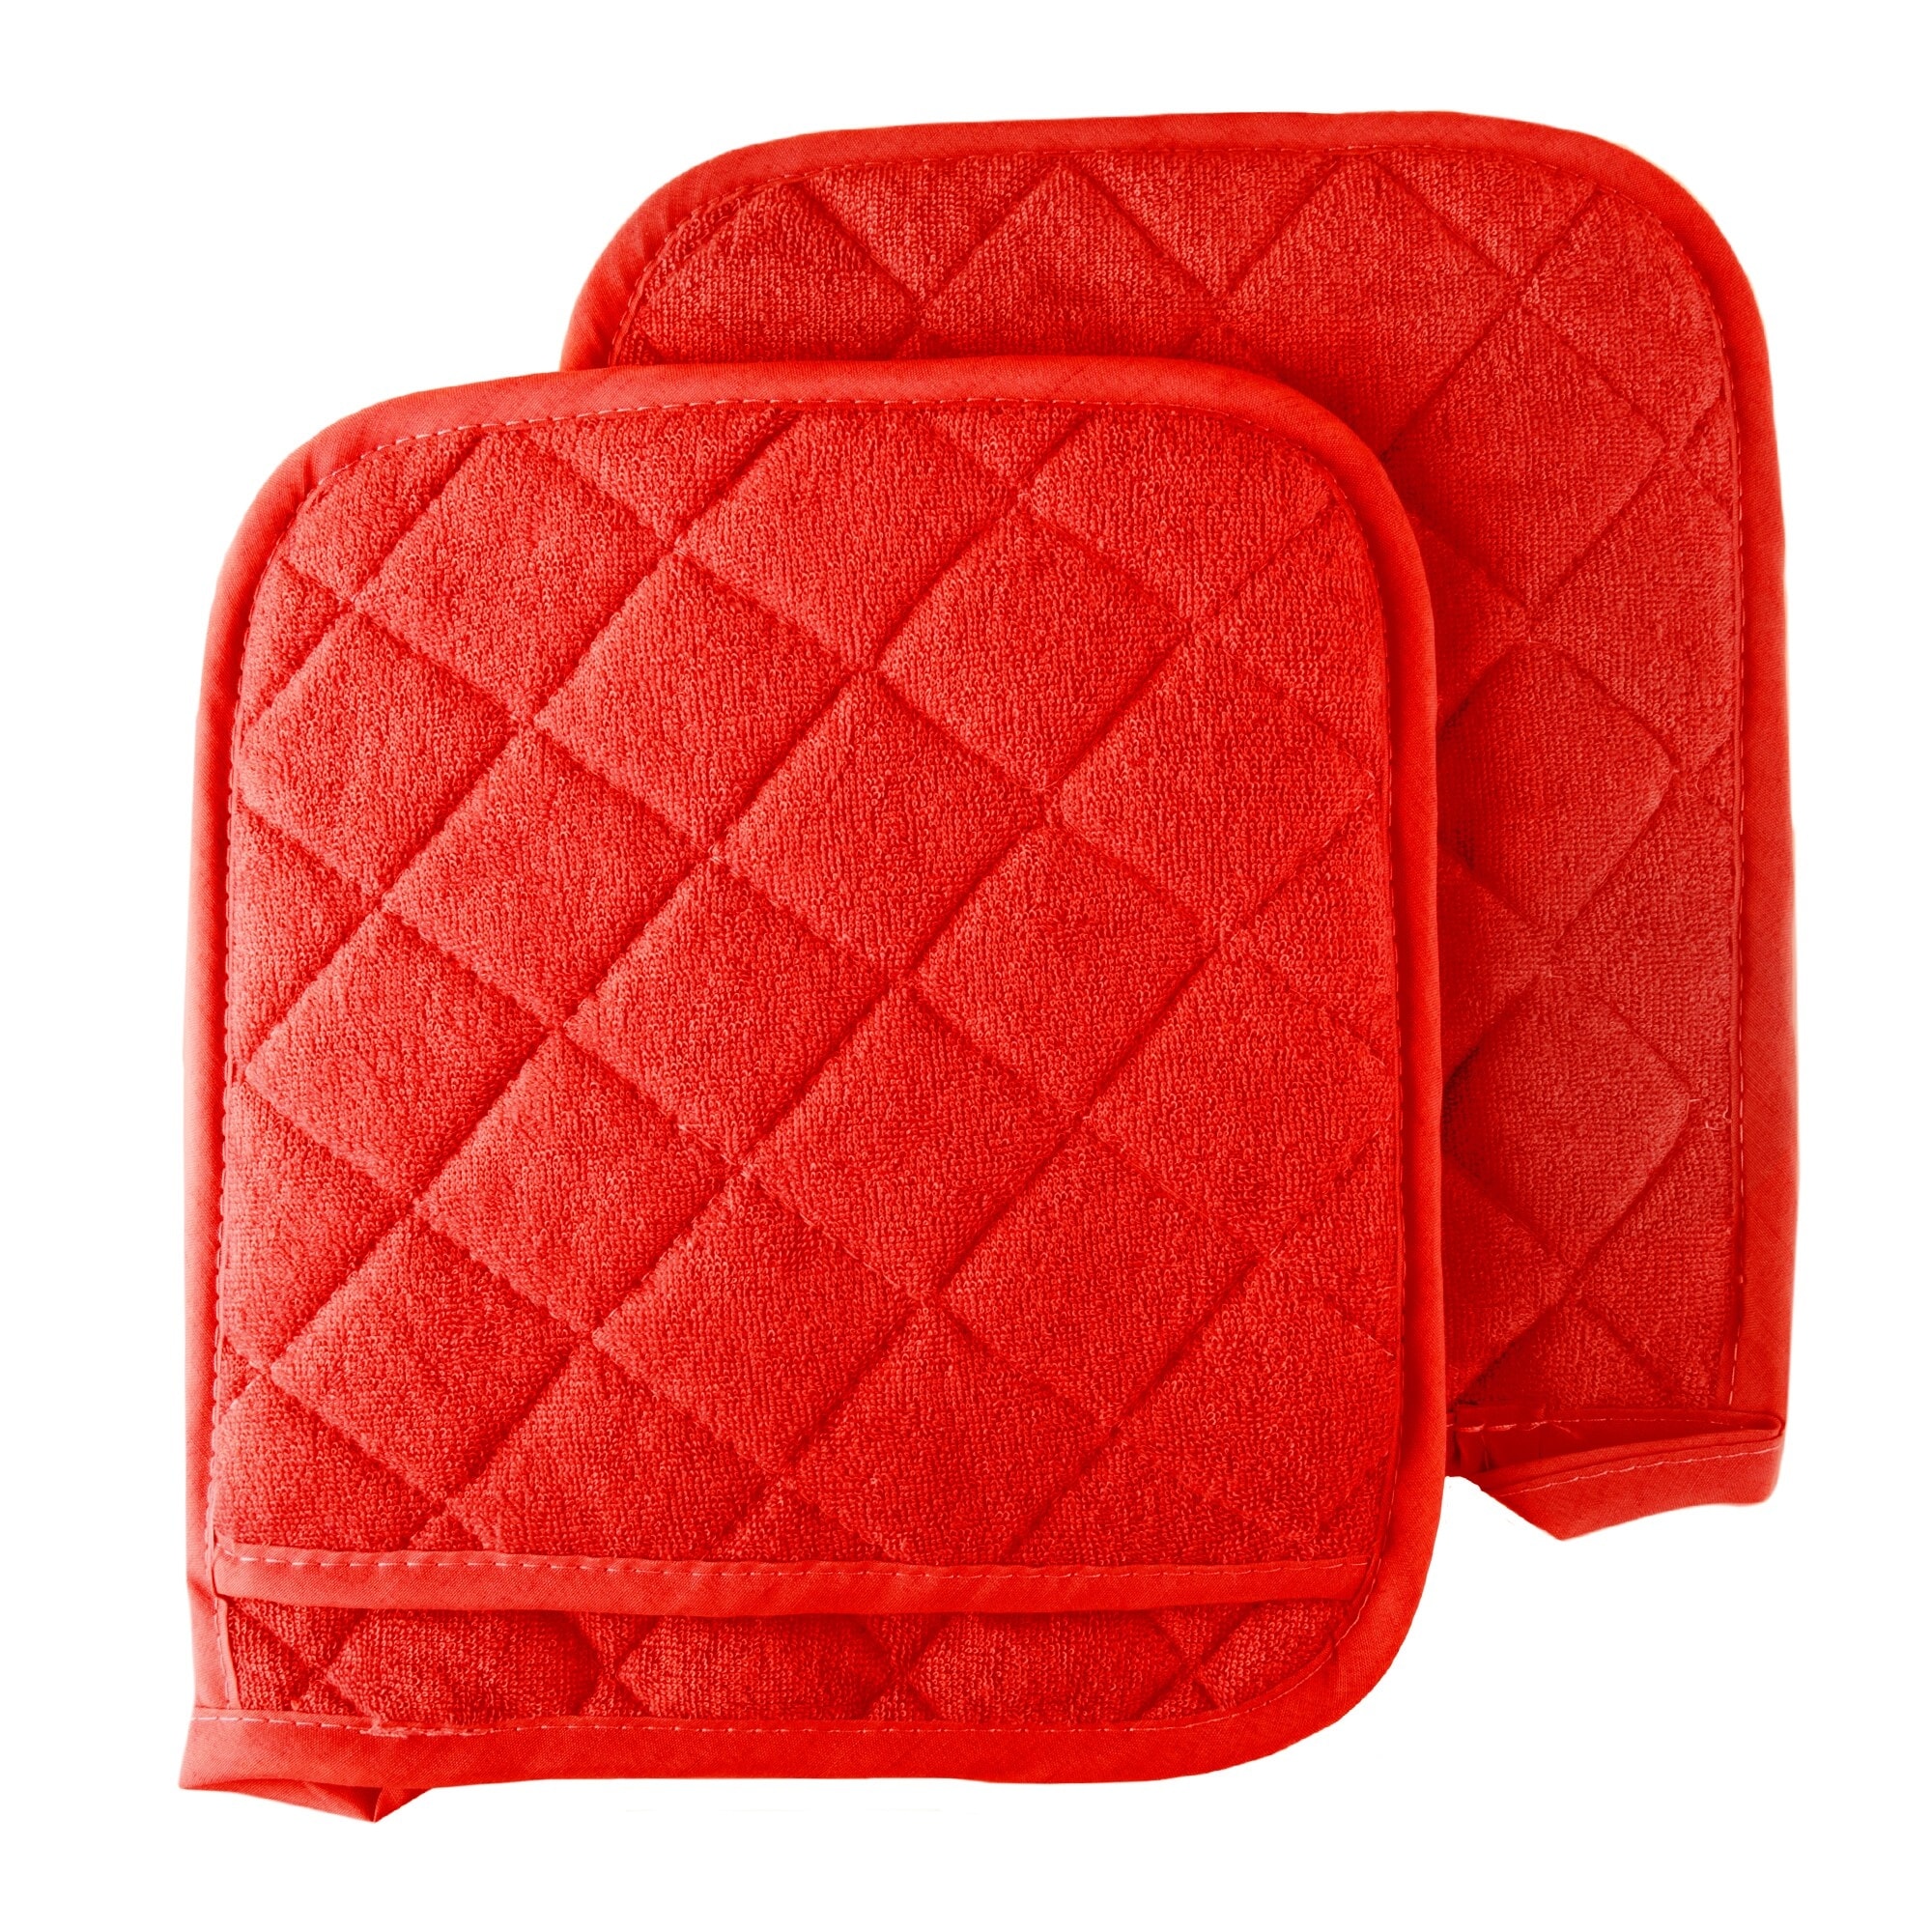 4 Pack Square Pot Holders, Cotton Heat Resistant Hotpads for Cooking  Kitchen, Pot Holder Set for Baking Camping- Red